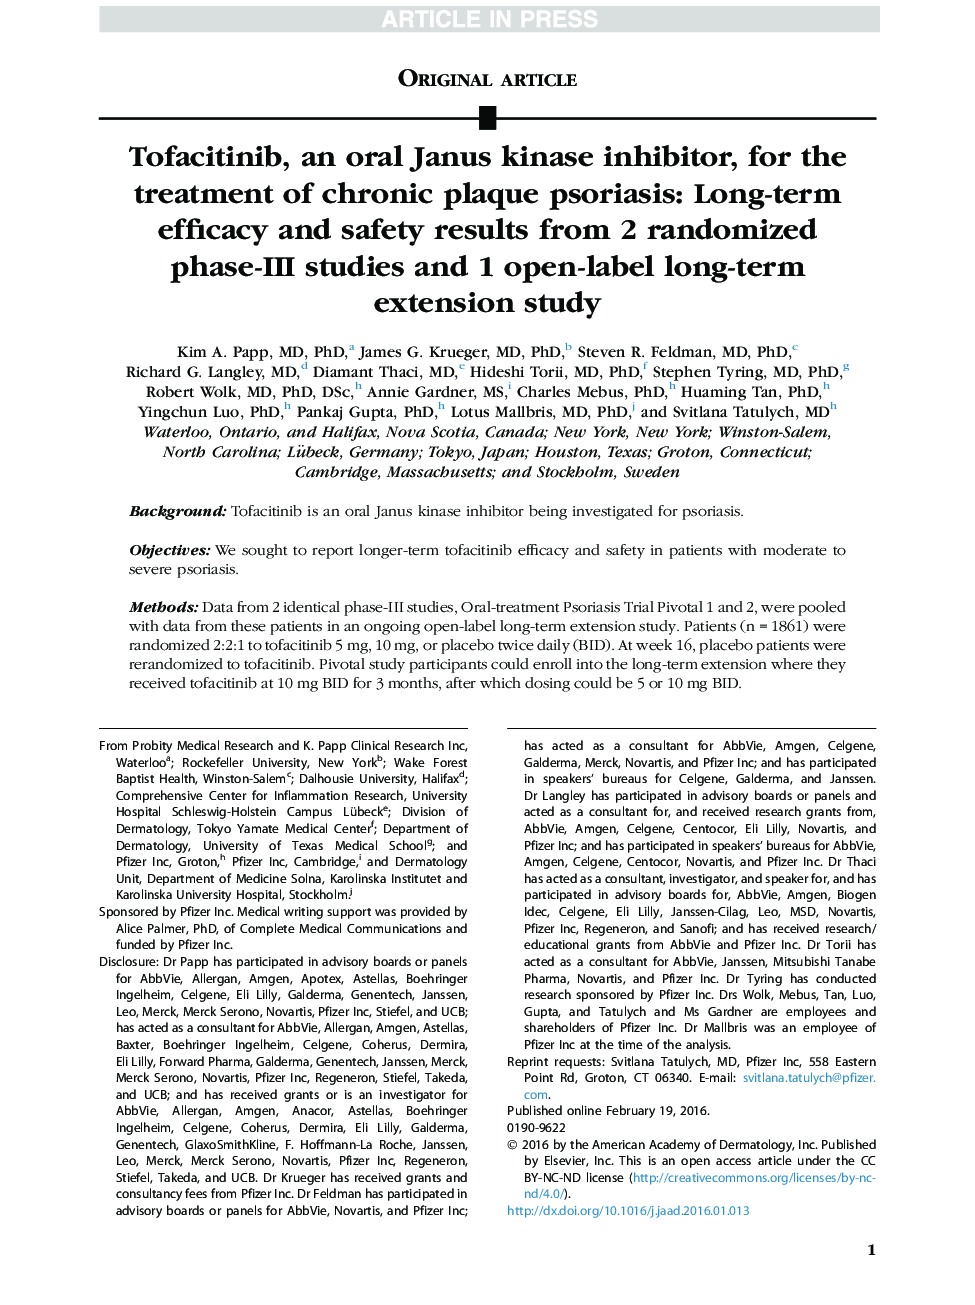 Tofacitinib, an oral Janus kinase inhibitor, for the treatment of chronic plaque psoriasis: Long-term efficacy and safety results from 2 randomized phase-III studies and 1 open-label long-term extension study